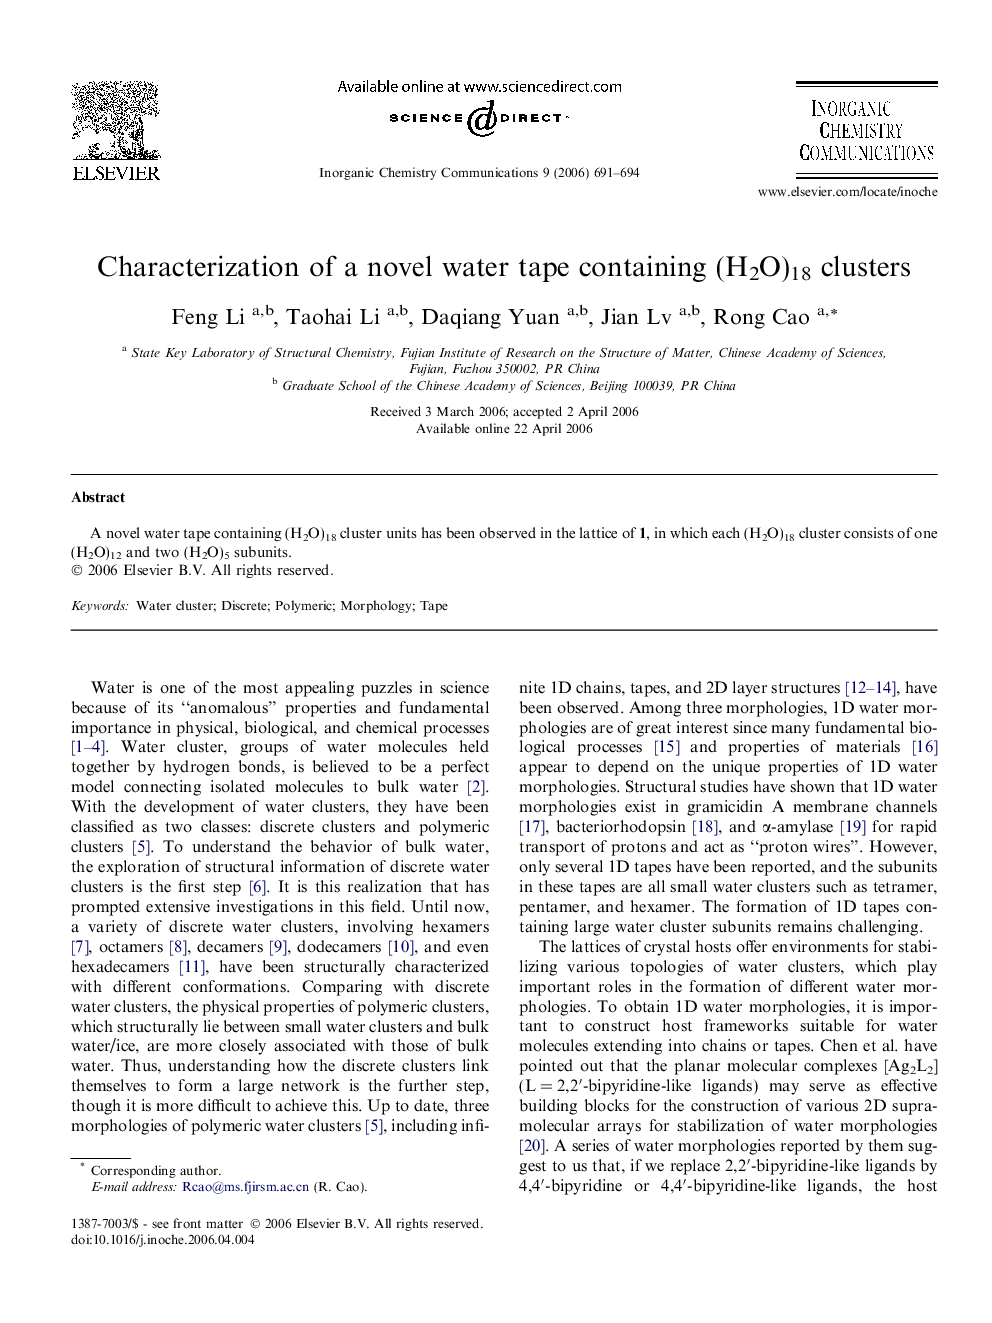 Characterization of a novel water tape containing (H2O)18 clusters